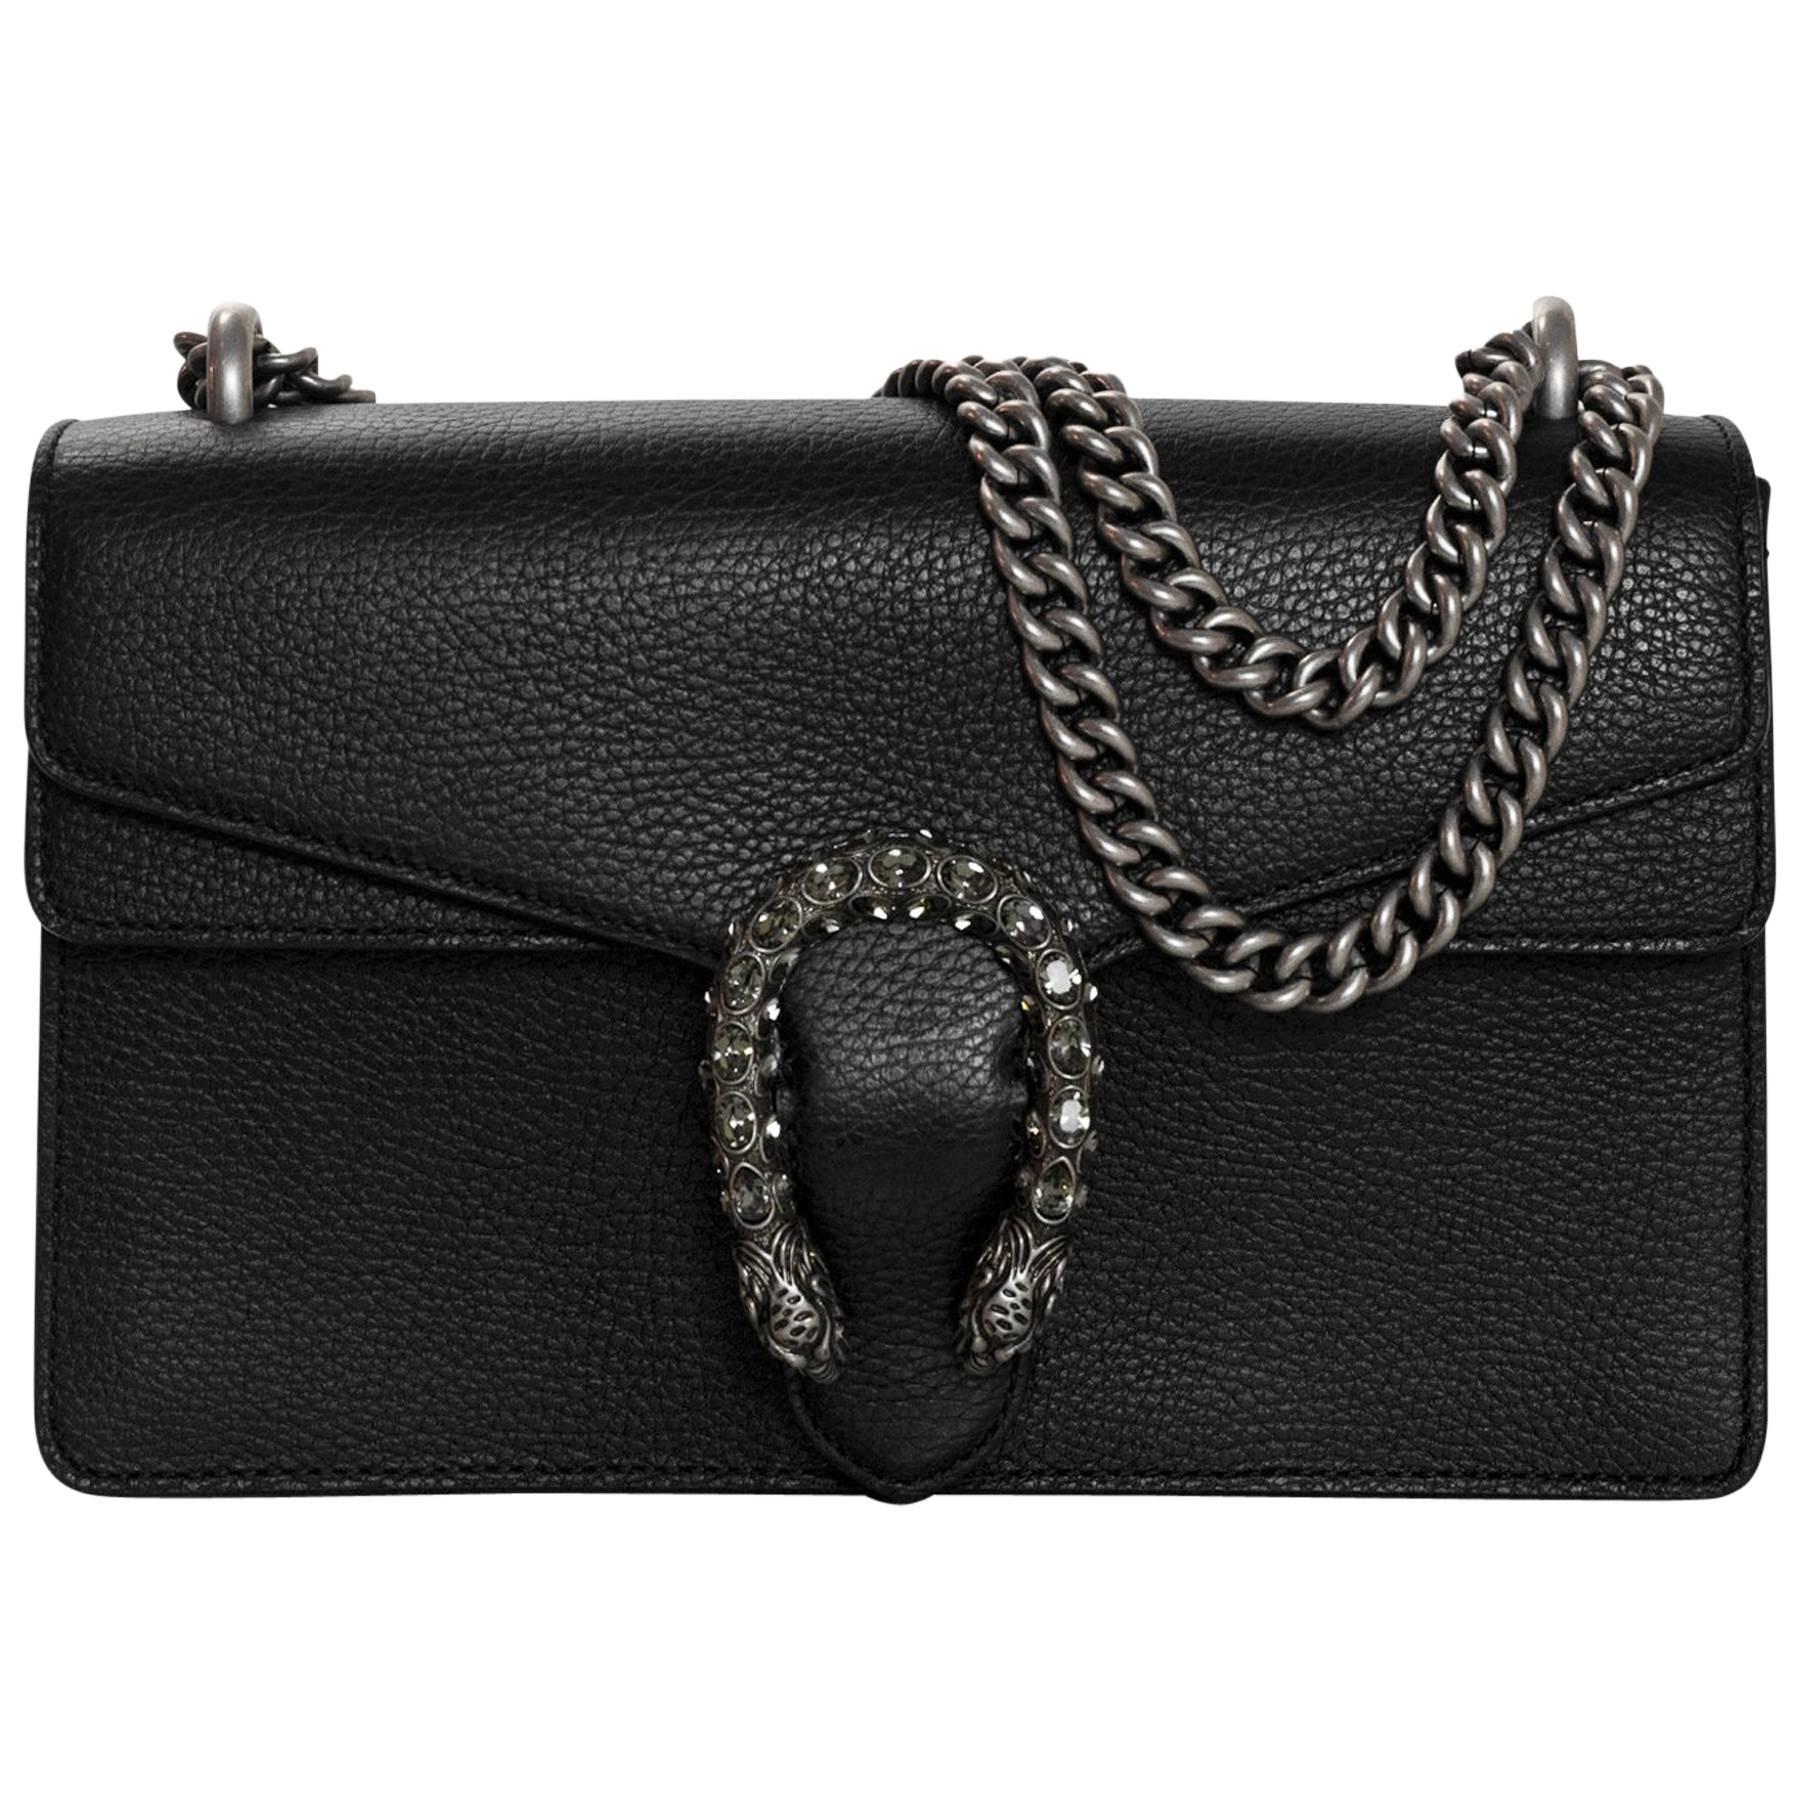 Gucci Black Leather Small Crystal Dionysus Flap Bag